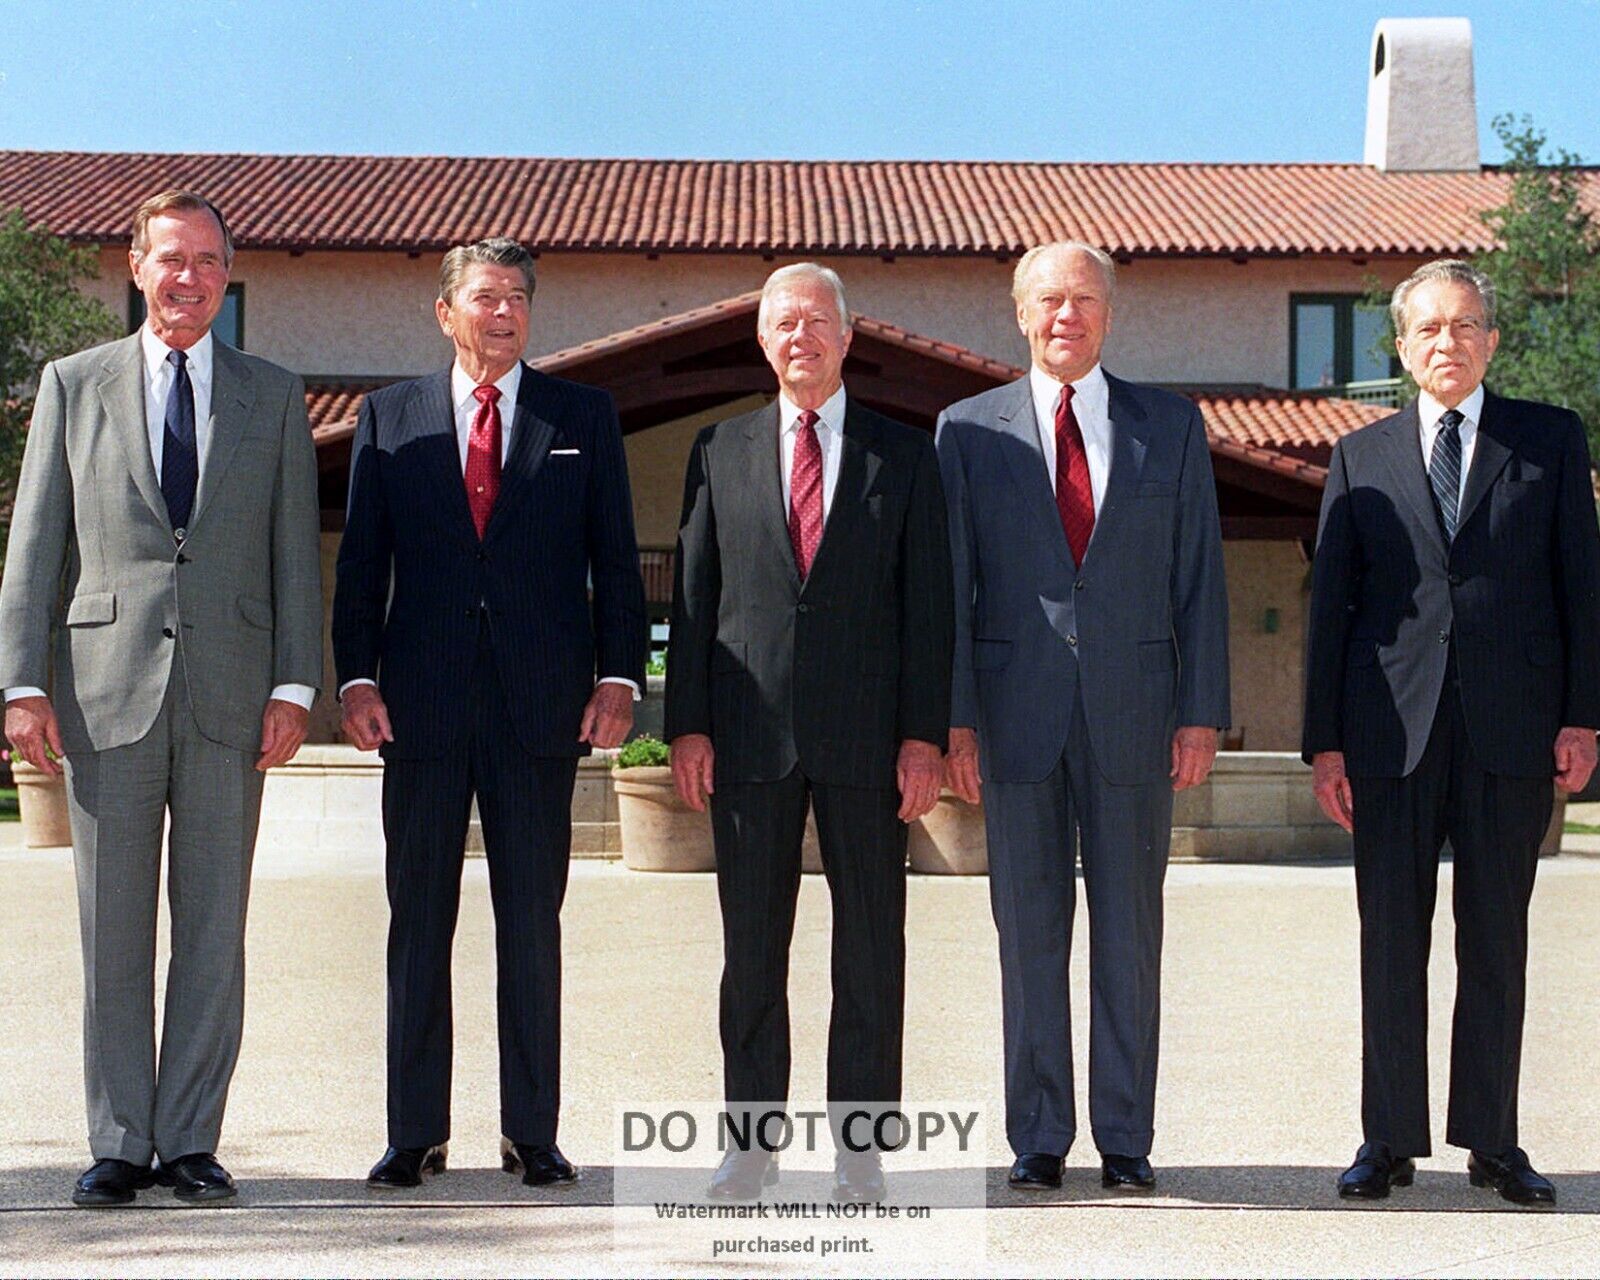 GEORGE BUSH w/ NIXON, CARTER & FORD AT REAGAN LIBRARY OPEN - 8X10 PHOTO (RT613)